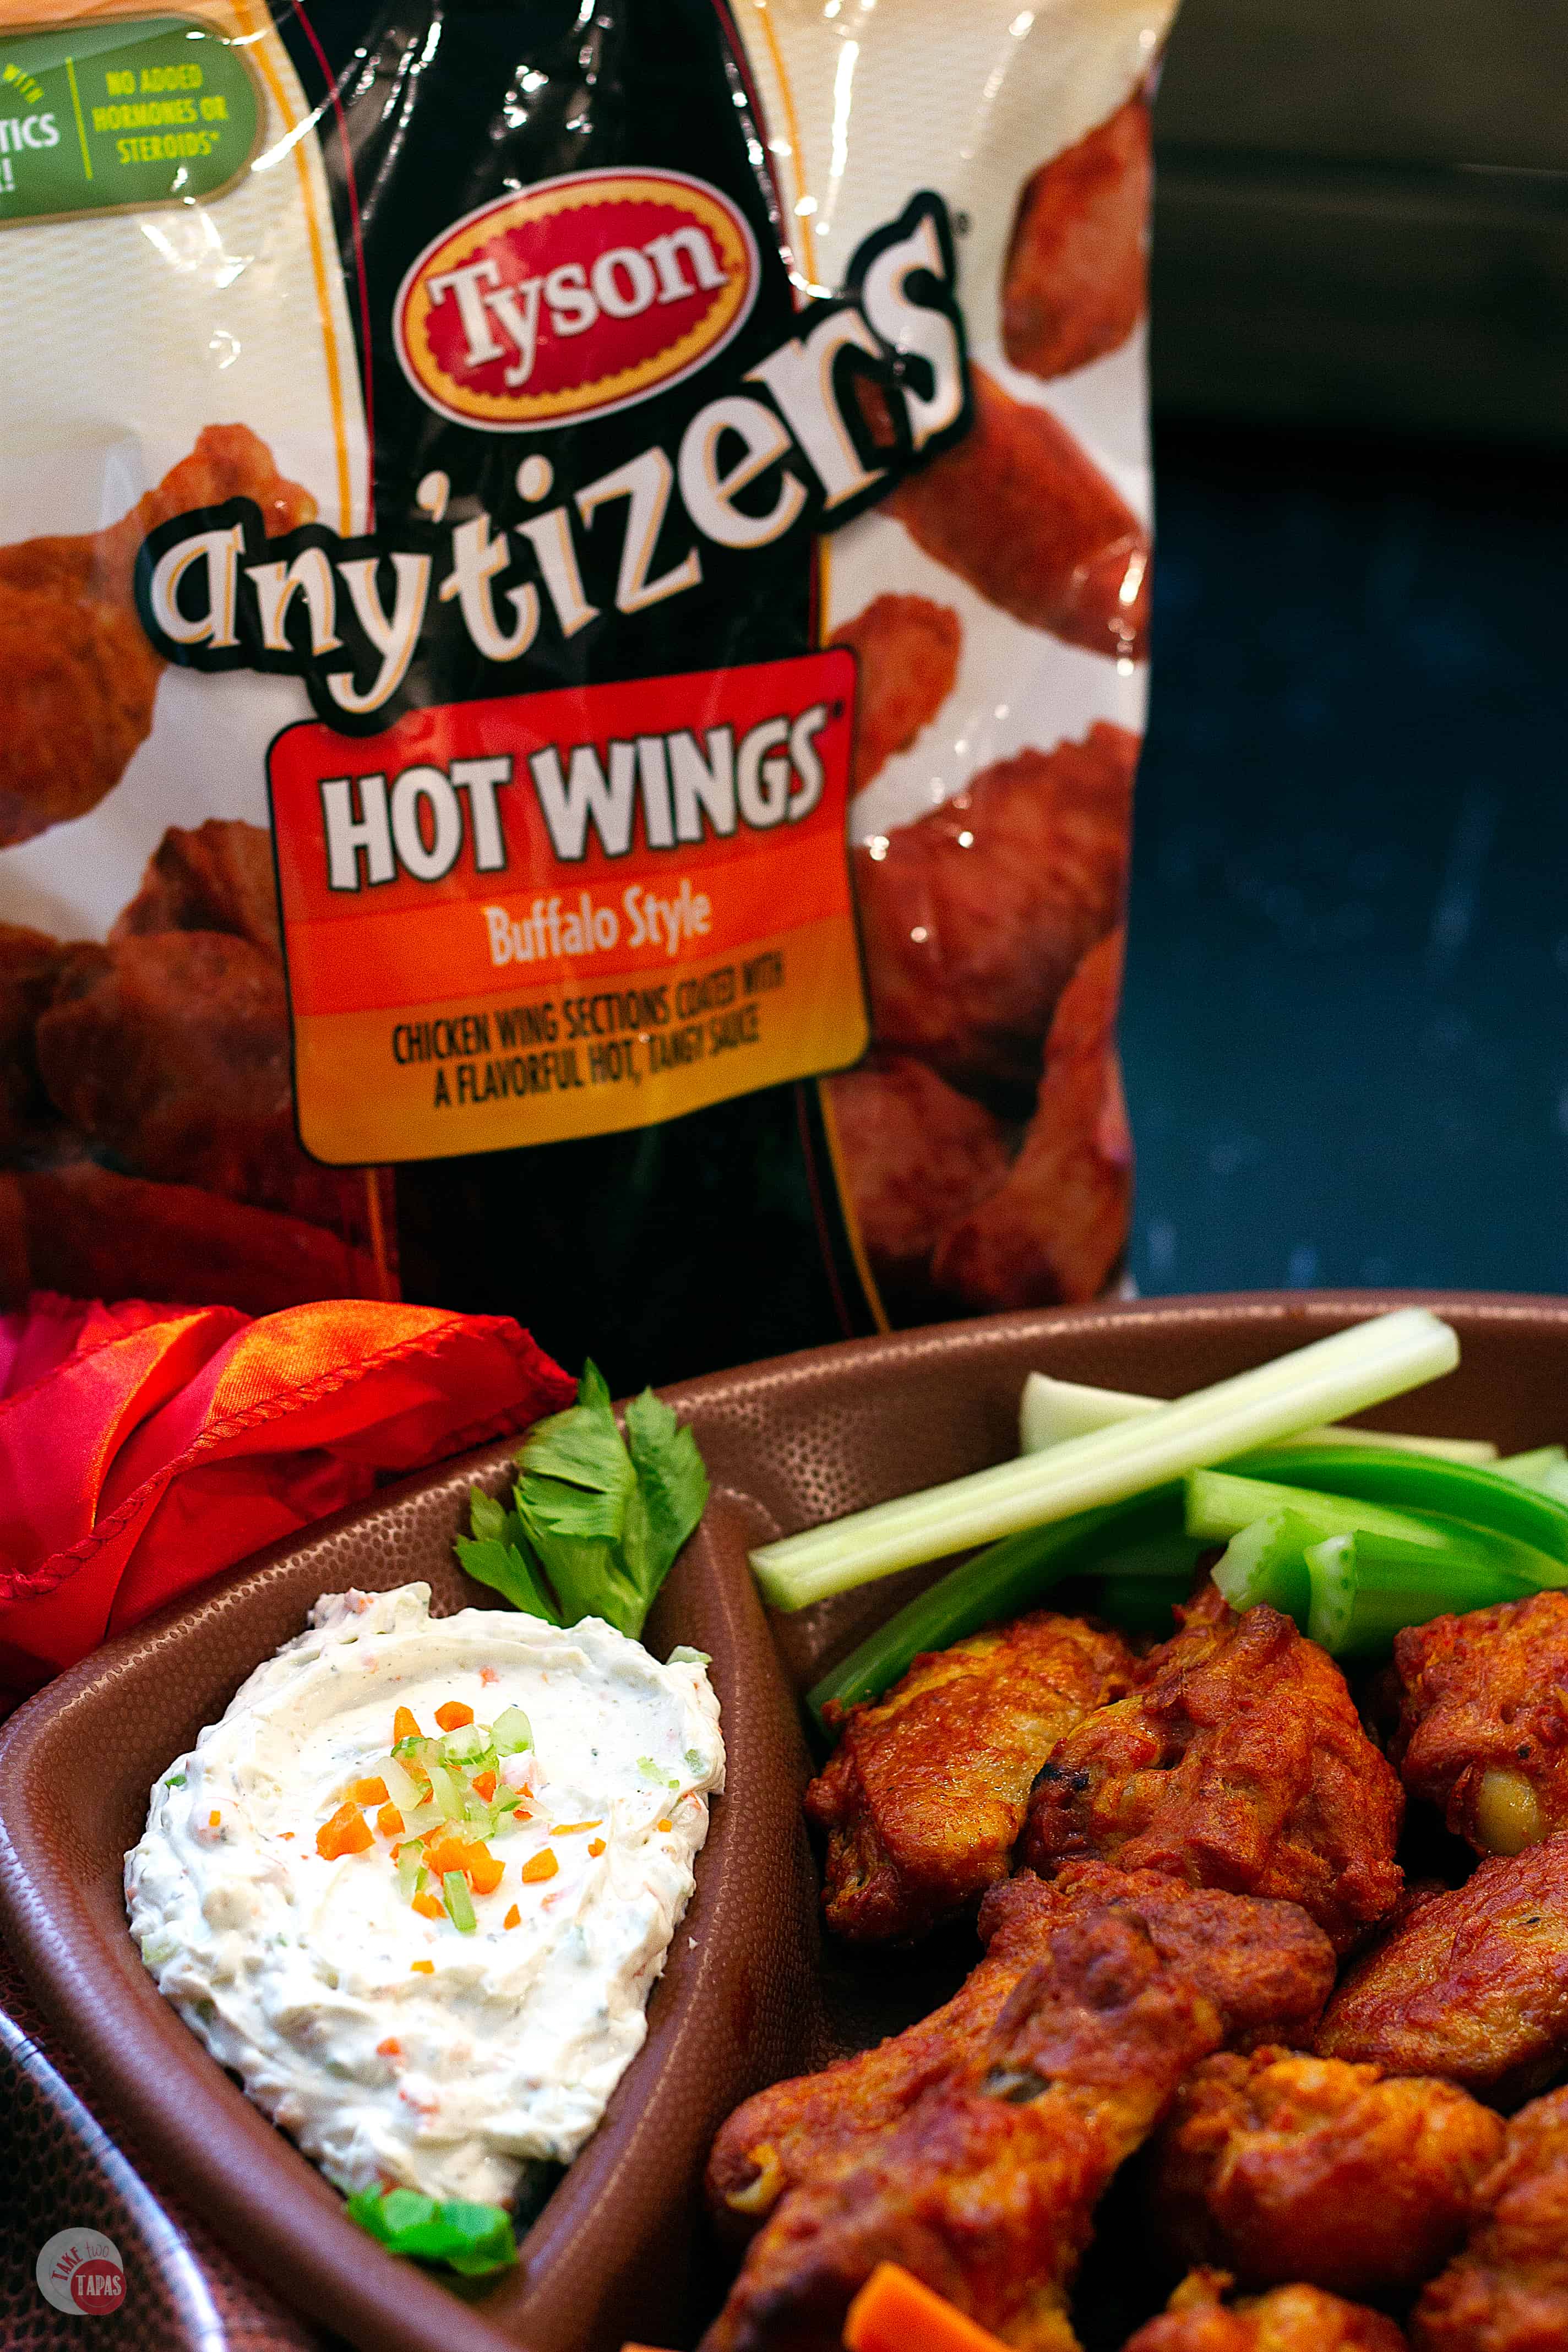 When the chicken wing dip debate rages on, come together over this Blue Ranch Chicken Wing Dip that is a combination of the two most popular dips.  Complete with a sprinkling of carrots AND celery! Tyson® Any’tizers® Hot Wings! #AD @TysonFoods #FallEntertainingWithTyson | Take Two Tapas | #ChickenWingDip #BlueCheeseRecipe #RanchDressingRecipe #Tailgating